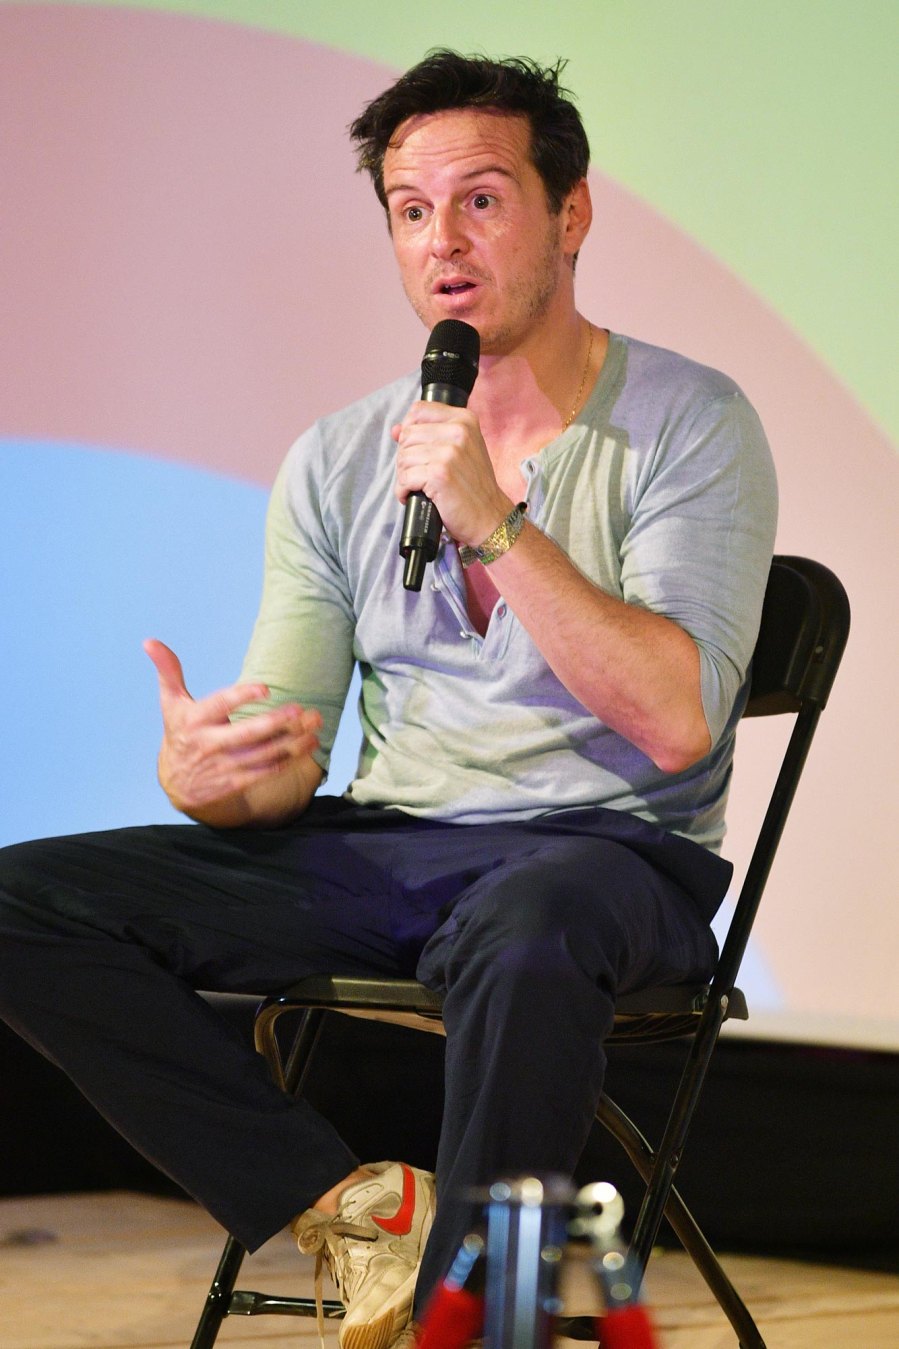 <p>Scott kept it simple with a blue henley, dark pants and white Nikes with an orange swoosh.</p>